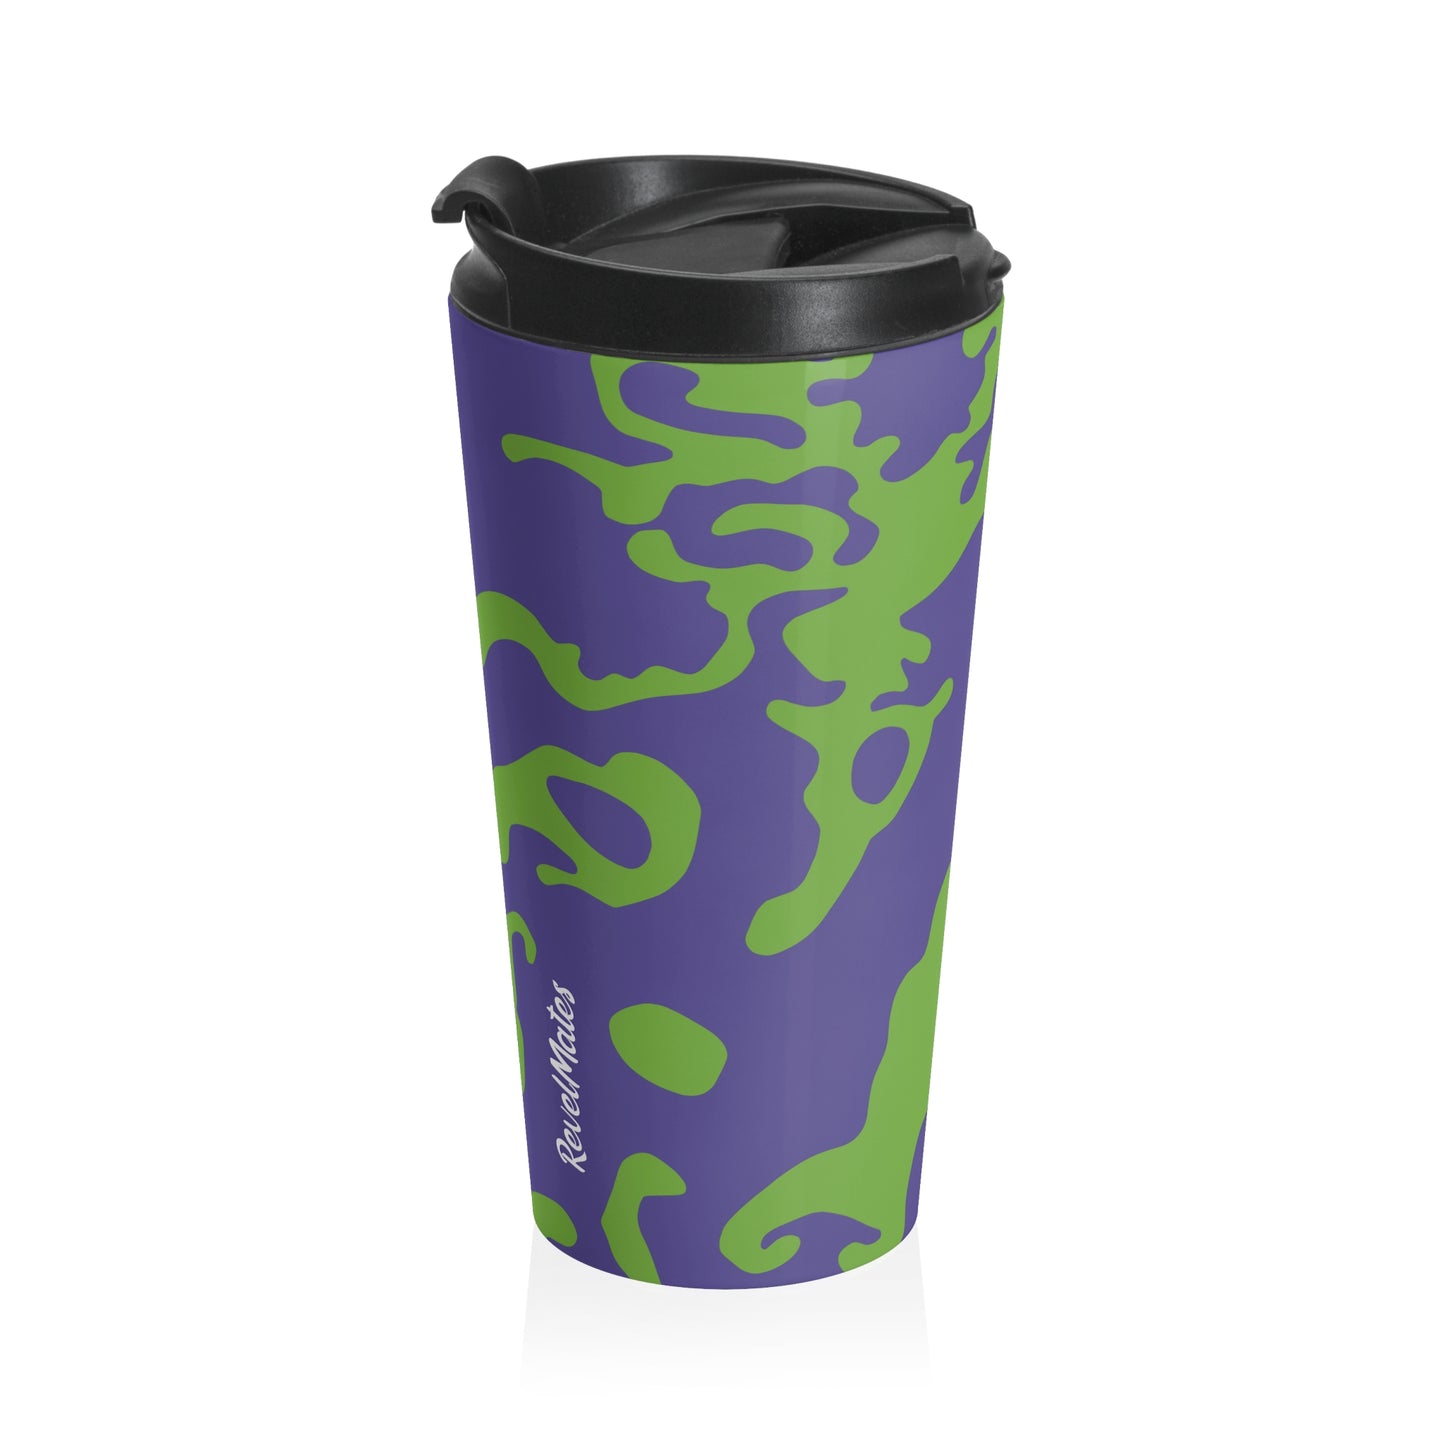 Stainless Steel Travel Mug With Cup 15oz (440ml)| Camouflage Lavender & Lime Design